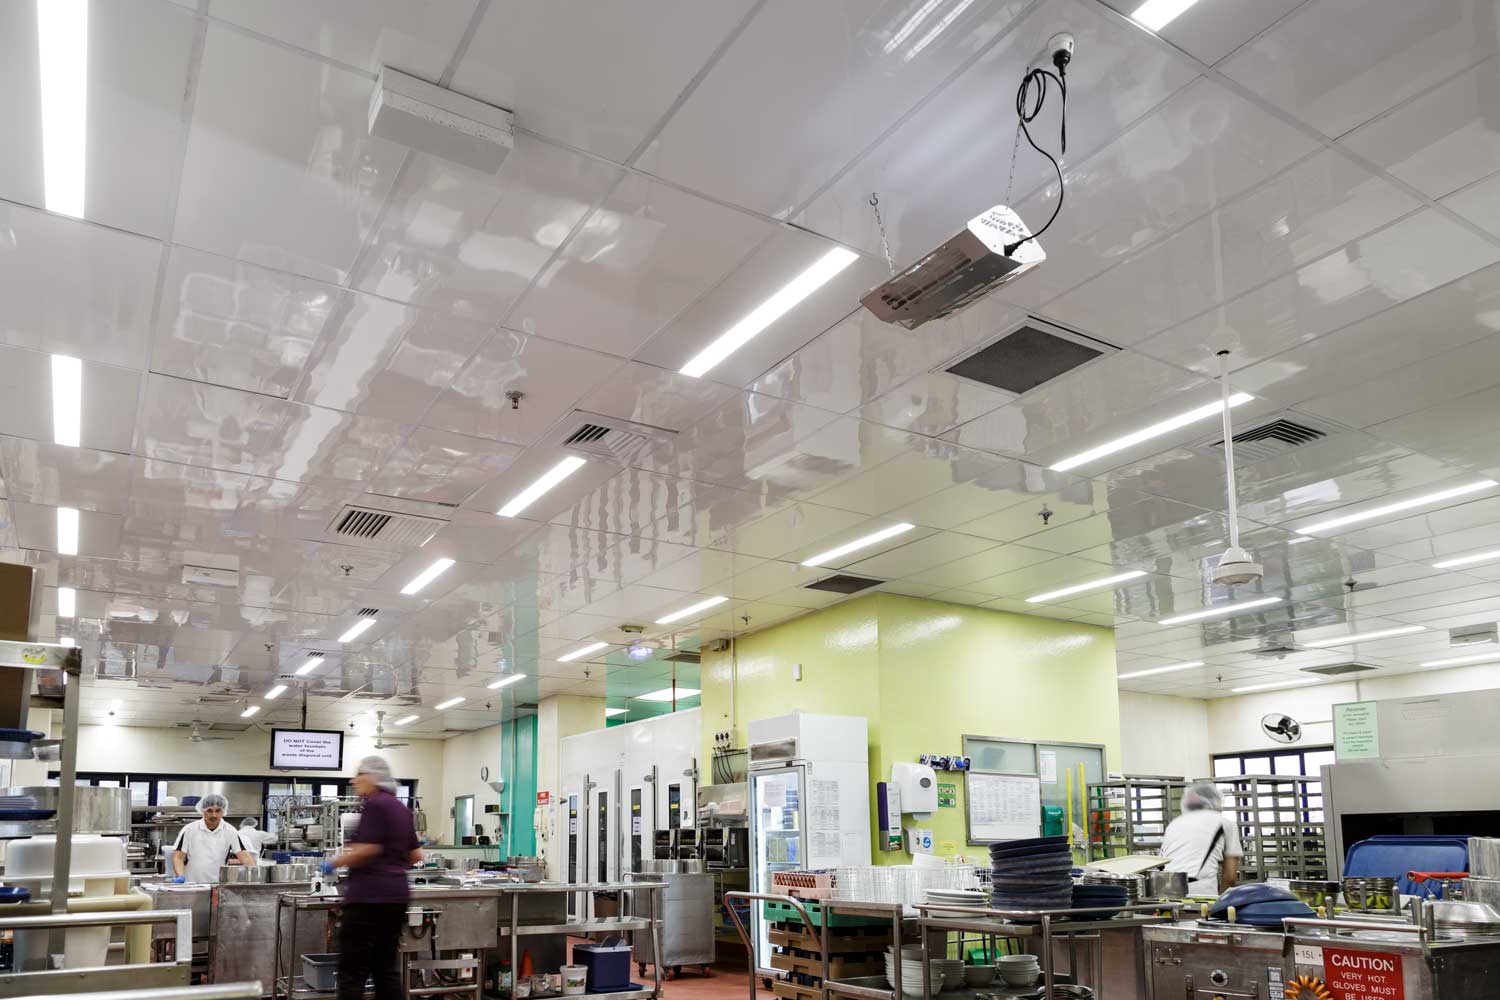 commercial kitchen ceiling replaced with low maintenance tiles – eboss